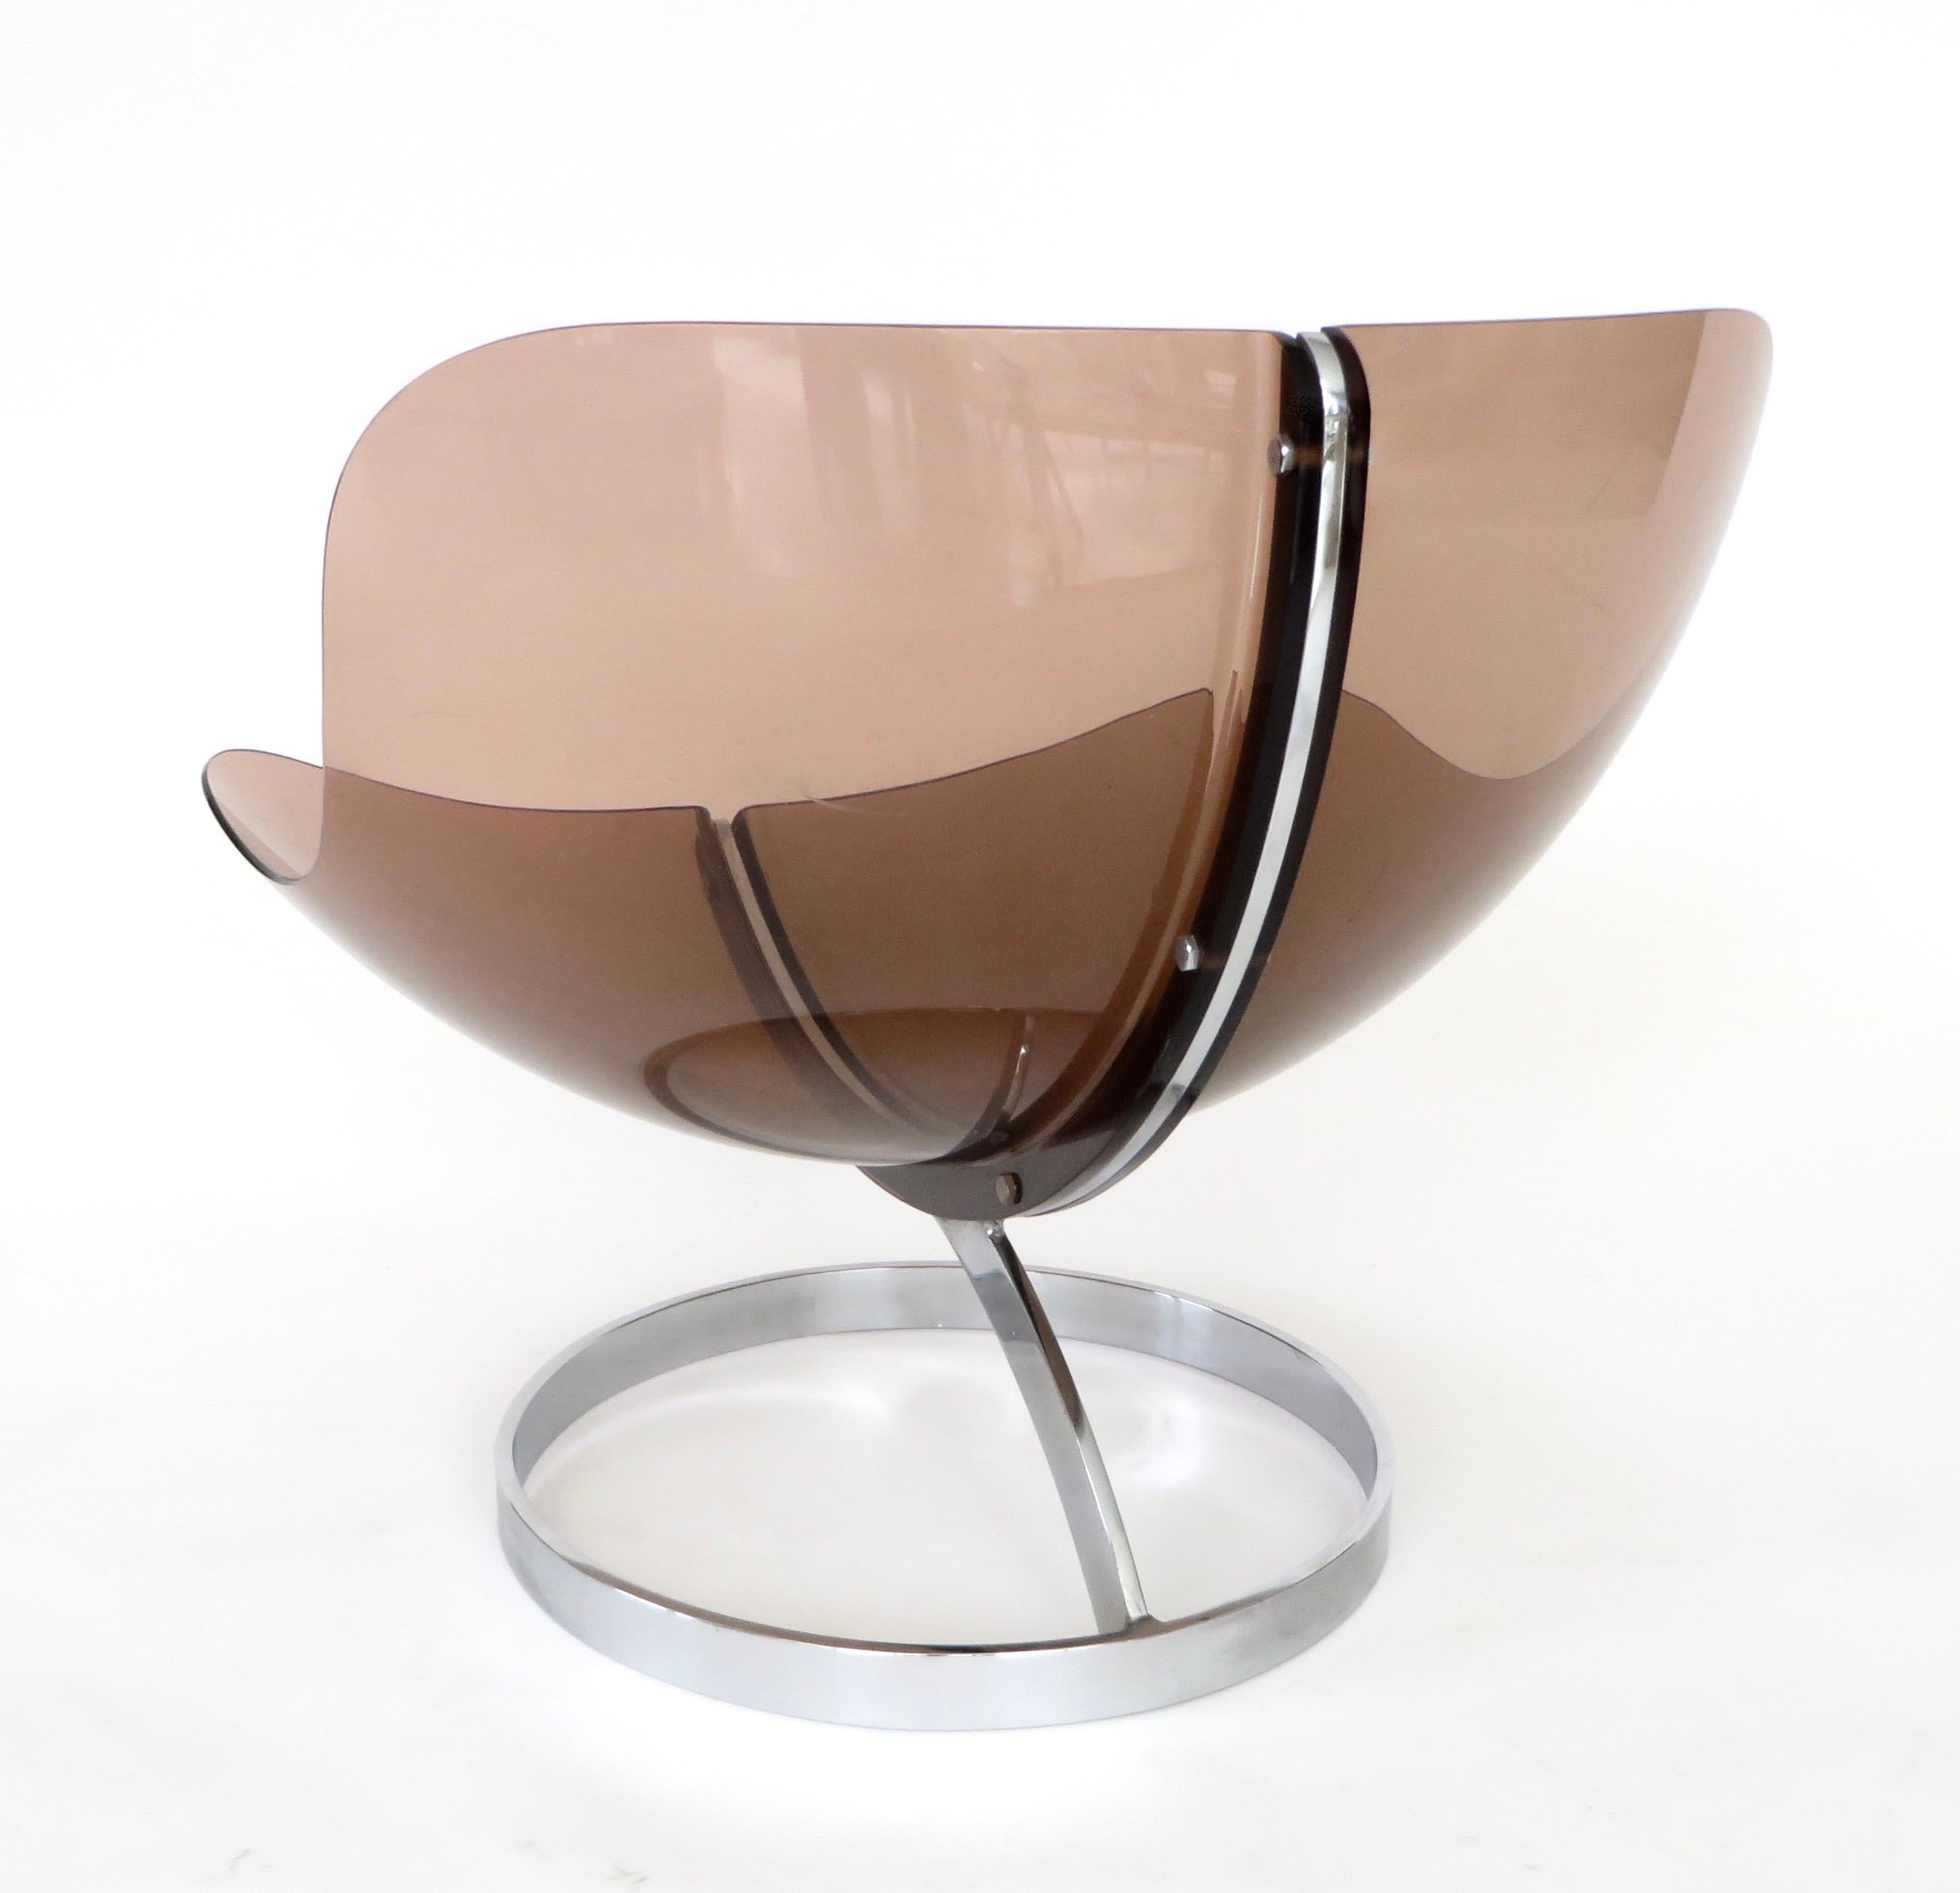 Boris Tabacoff French Sphere Chair Lucite Altuglas and Chrome c1971 For Sale 5